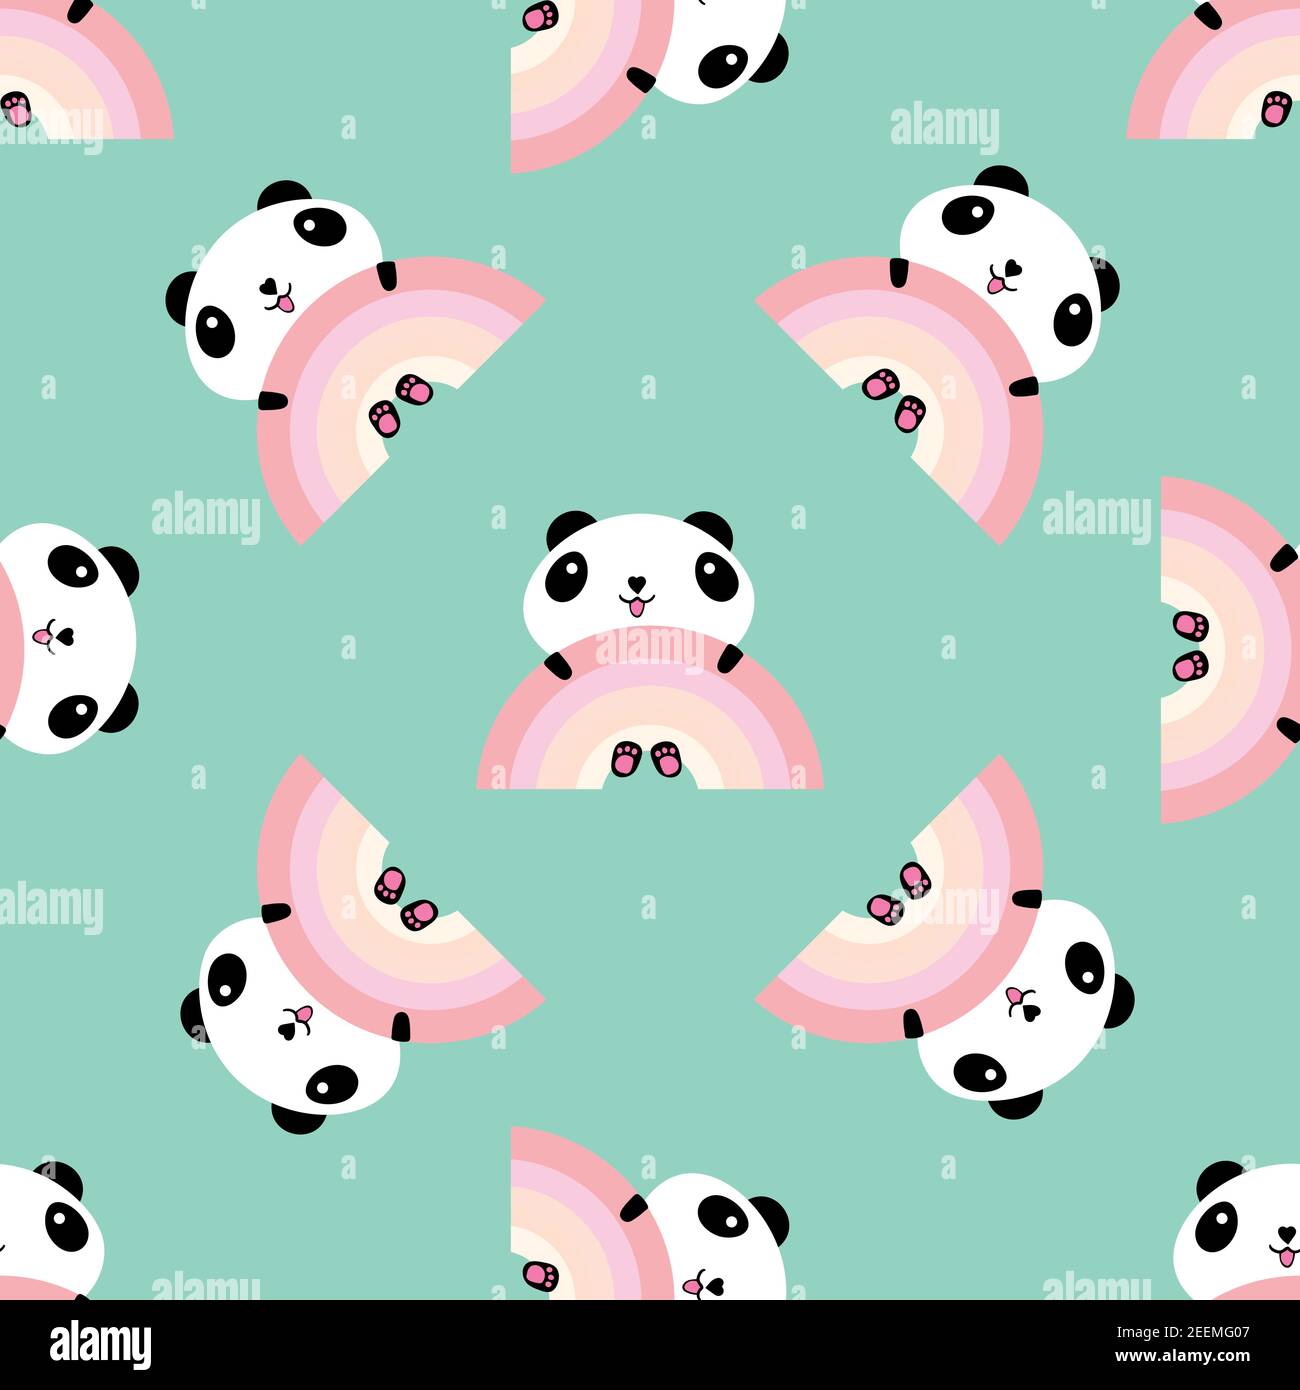 Kawaii panda rainbow seamless vector pattern background. Backdrop with cute black and white sitting cartoon bears holding on to pastel rainbows Stock Vector